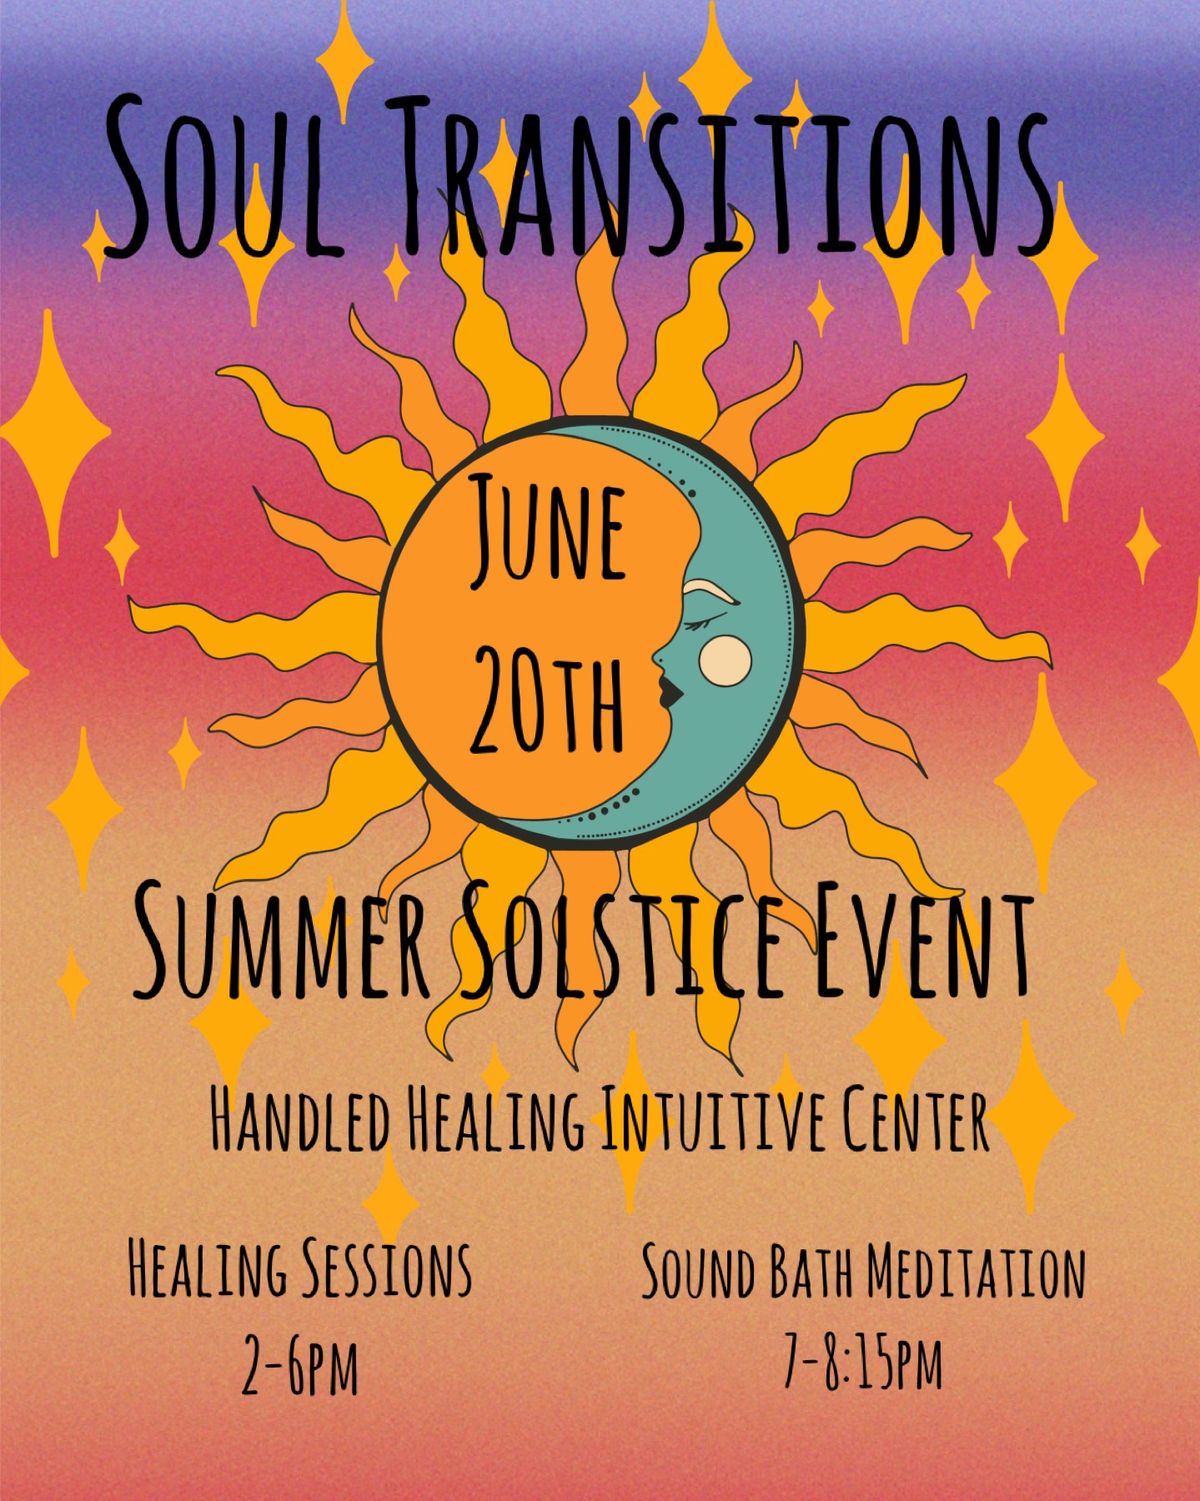 ??Summer Solstice Event?? with Soul Transitions 